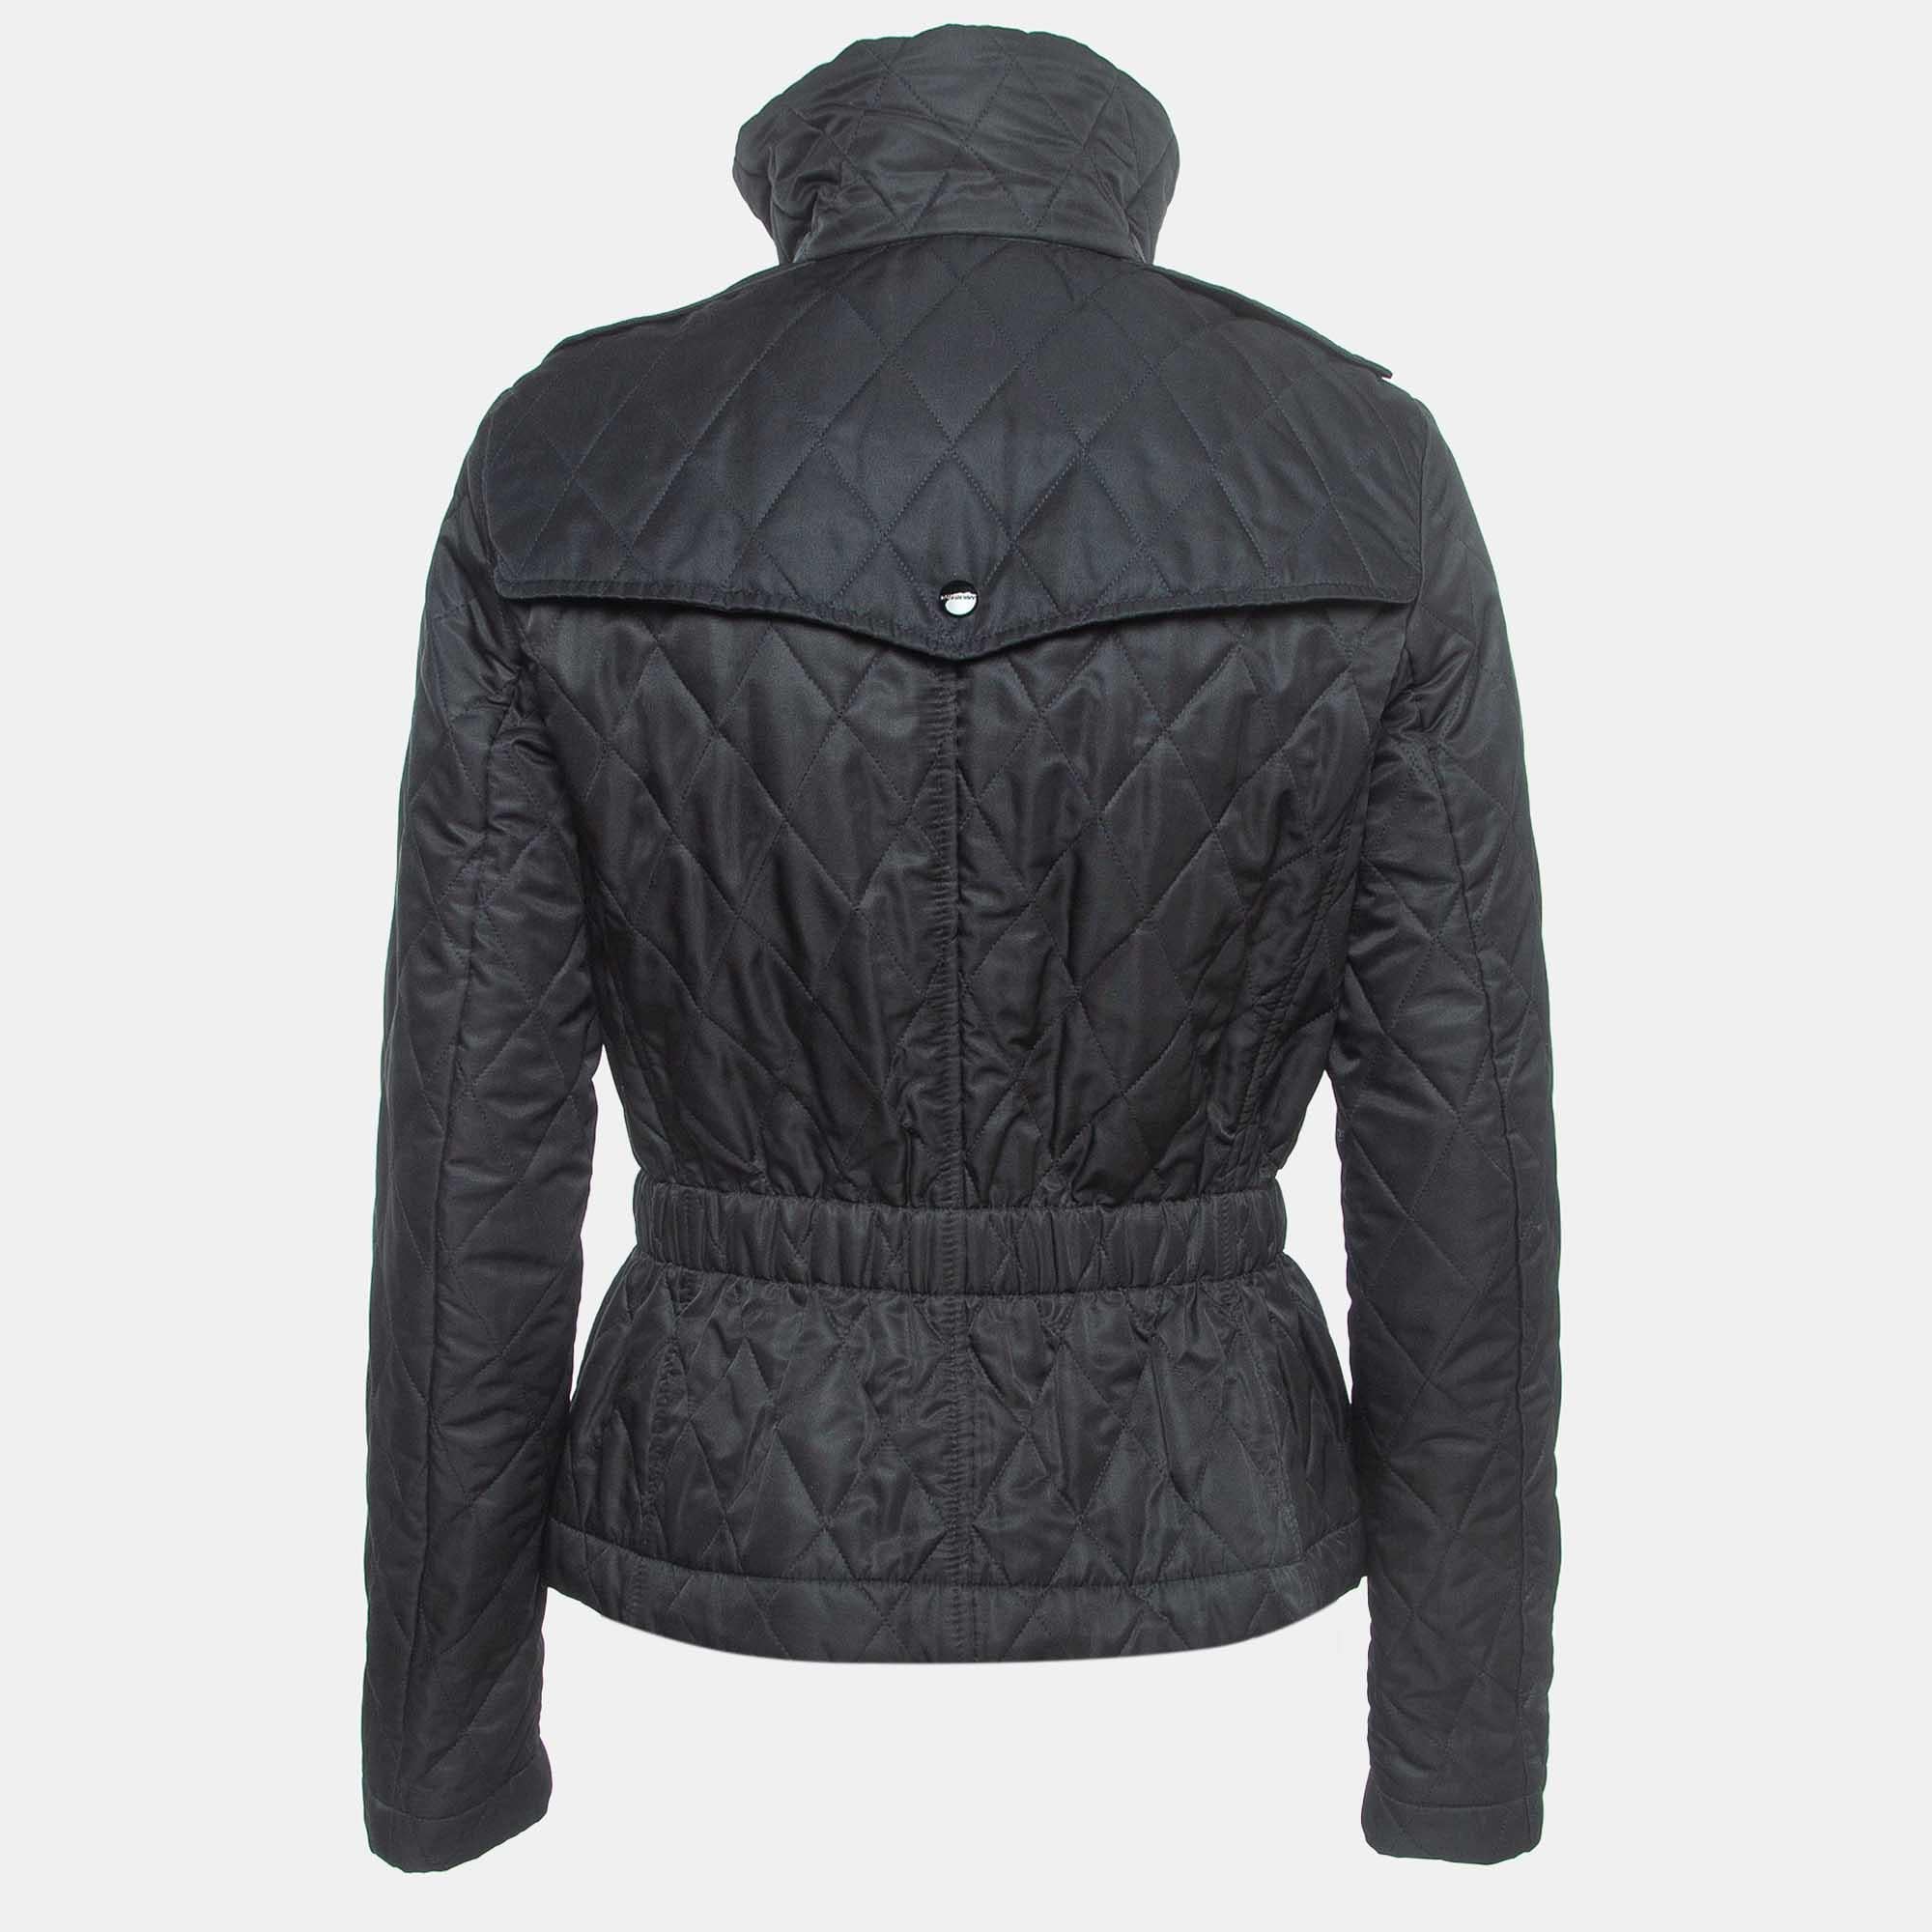 How fabulous does this designer jacket look! It is made of fine materials and features long sleeves. Pair it with pants and sneakers for a cool look.

